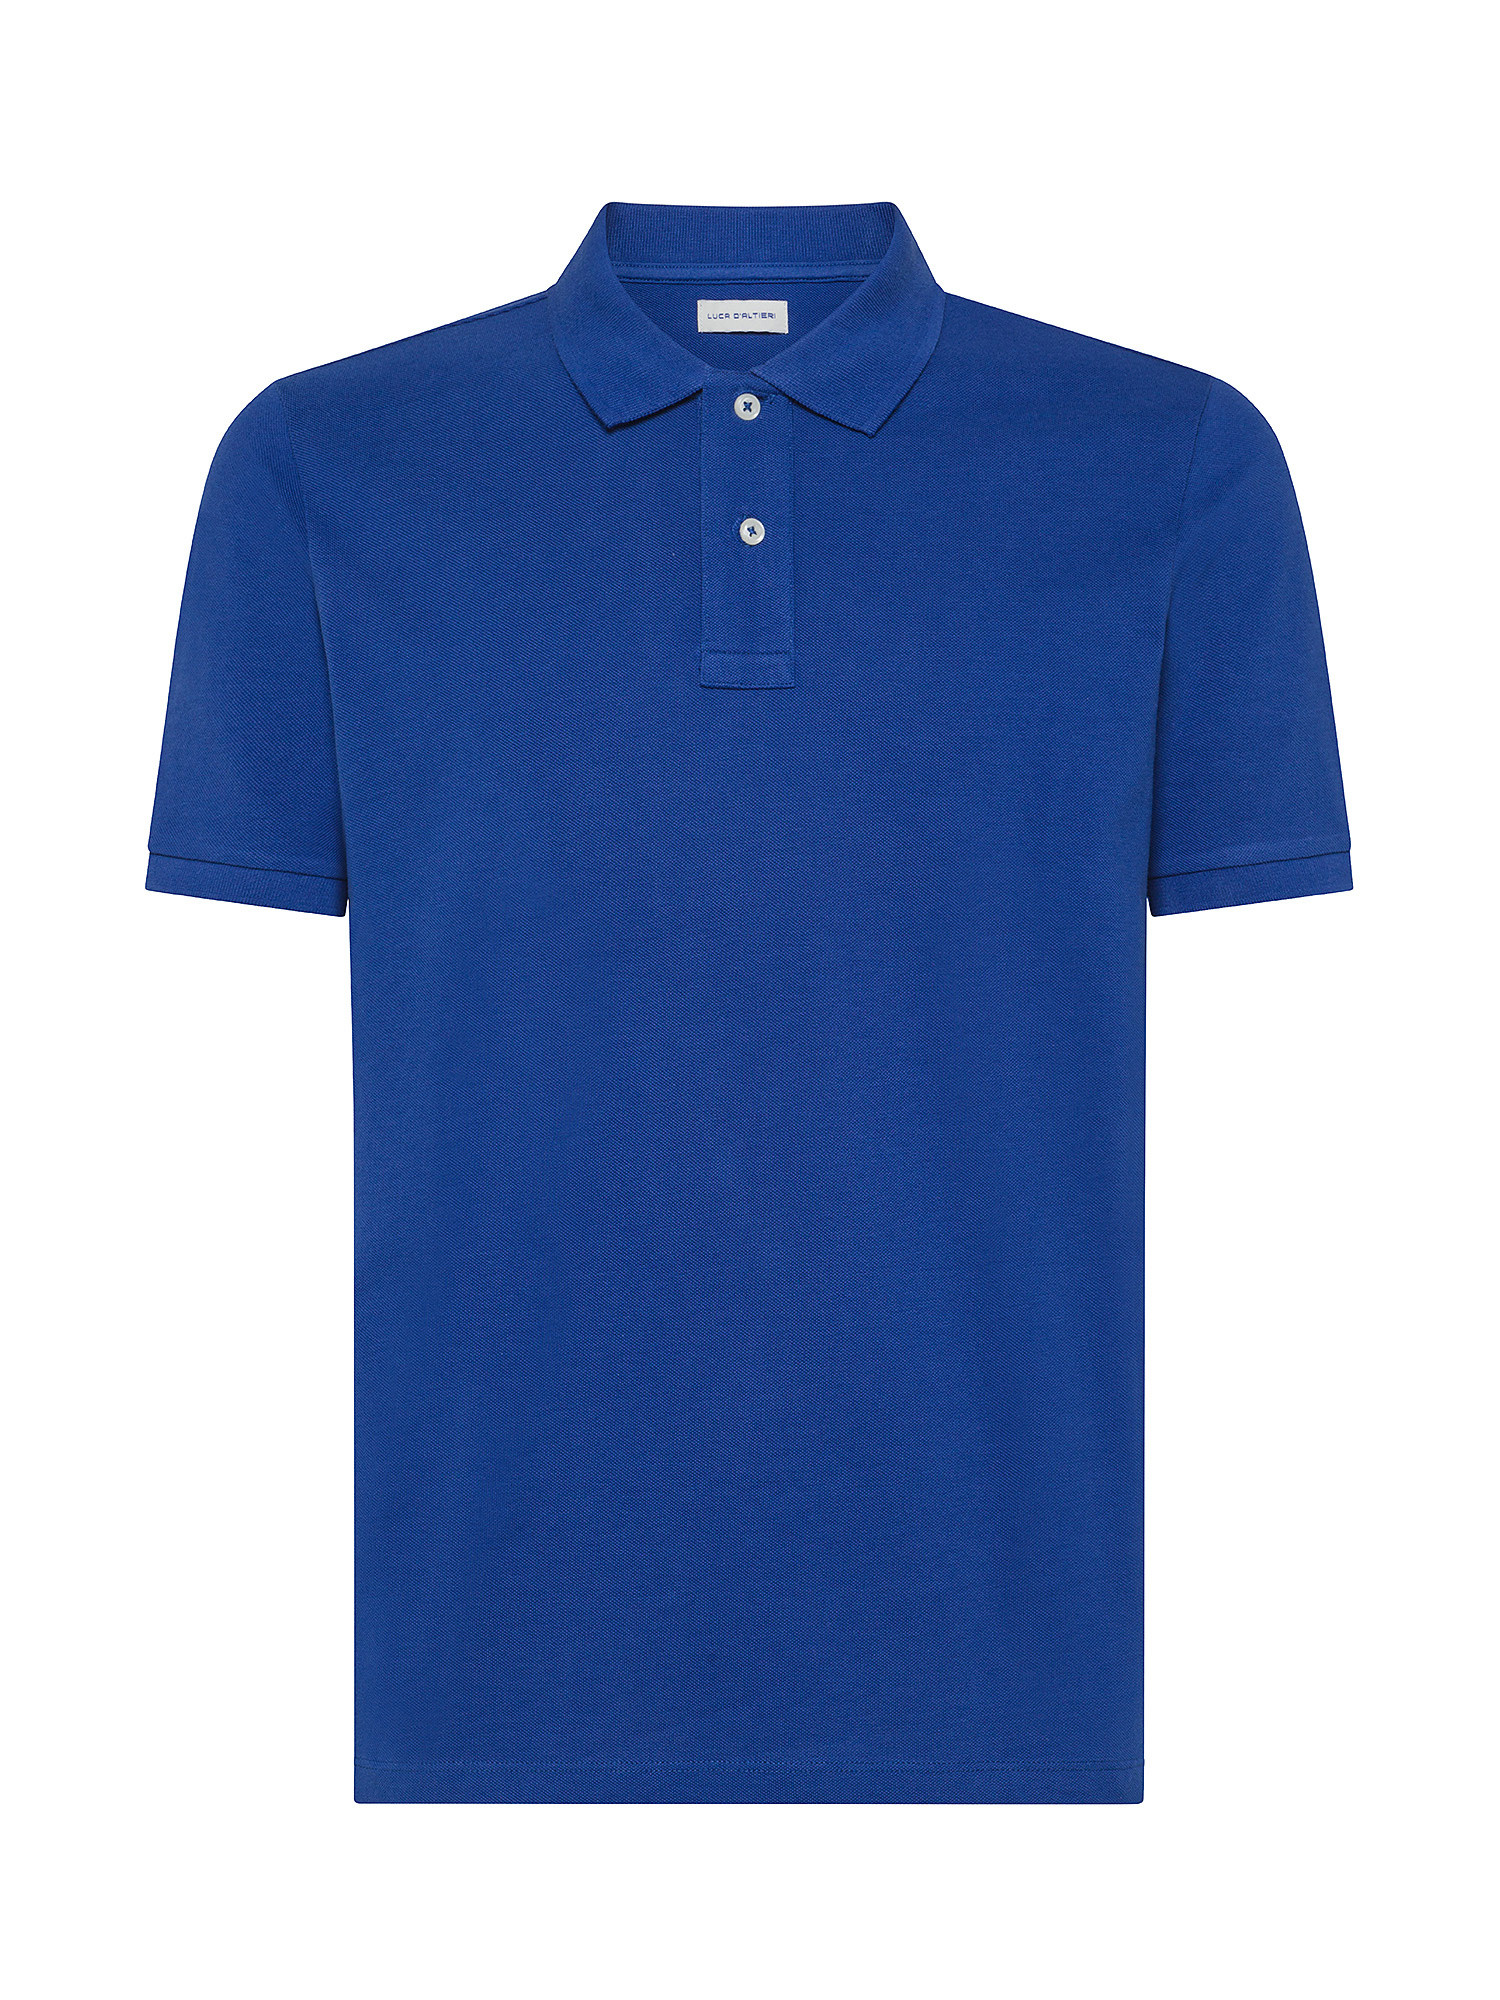 Luca D'Altieri - Polo in pure cotton, Royal Blue, large image number 0